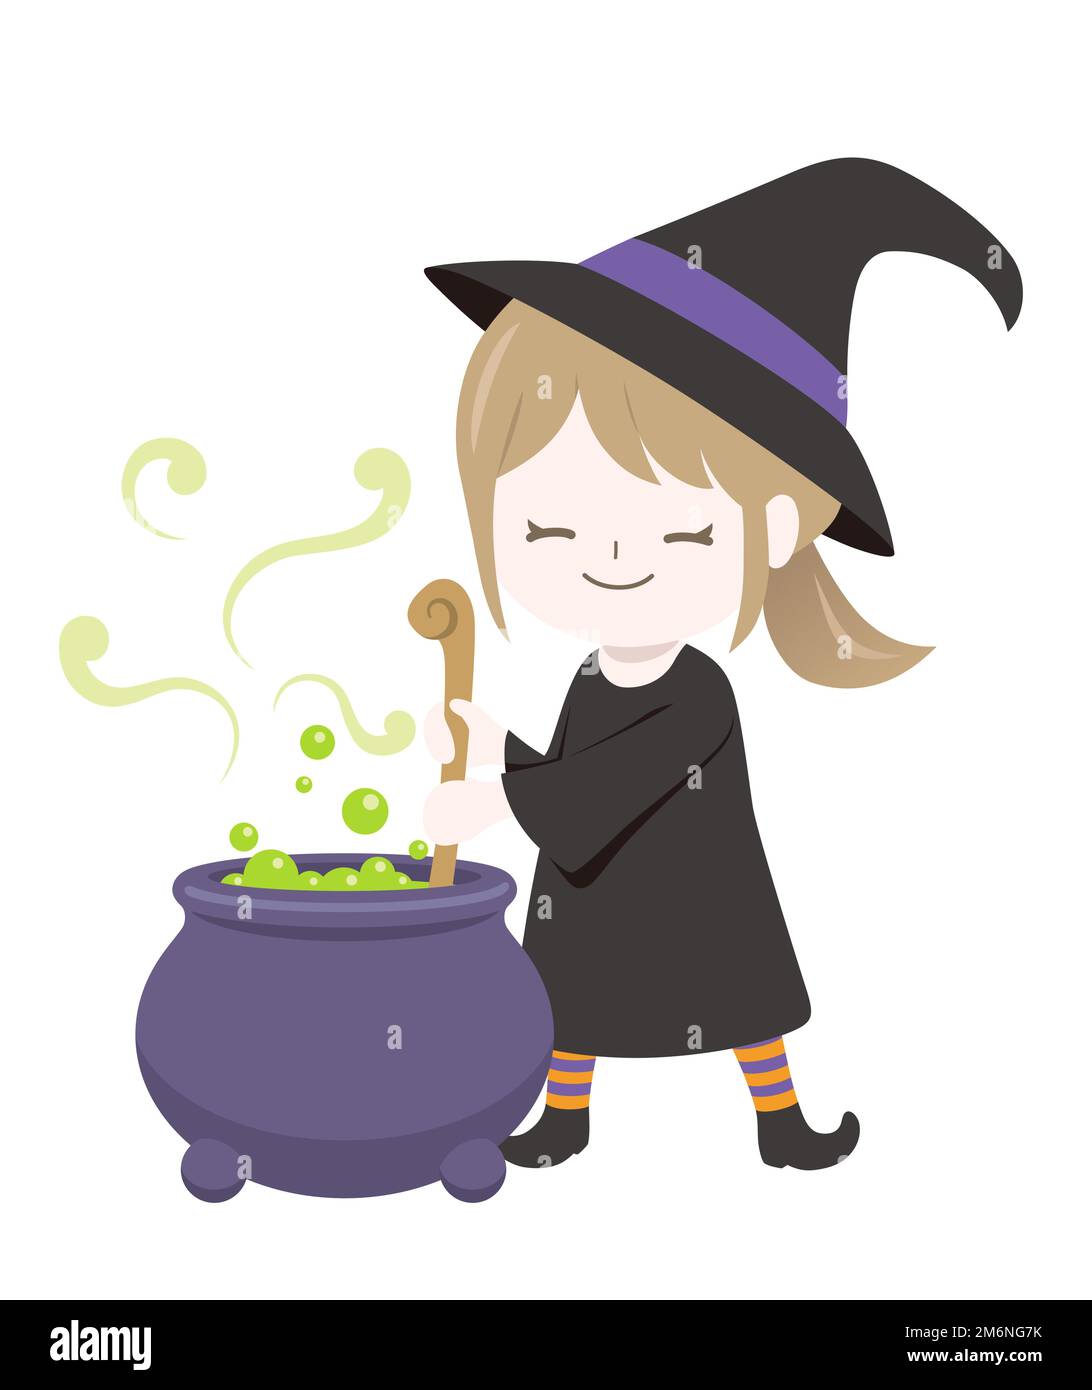 Cute Witch Making Magic Potions Isolated On A White Background. Vector Halloween Illustration. Stock Vector